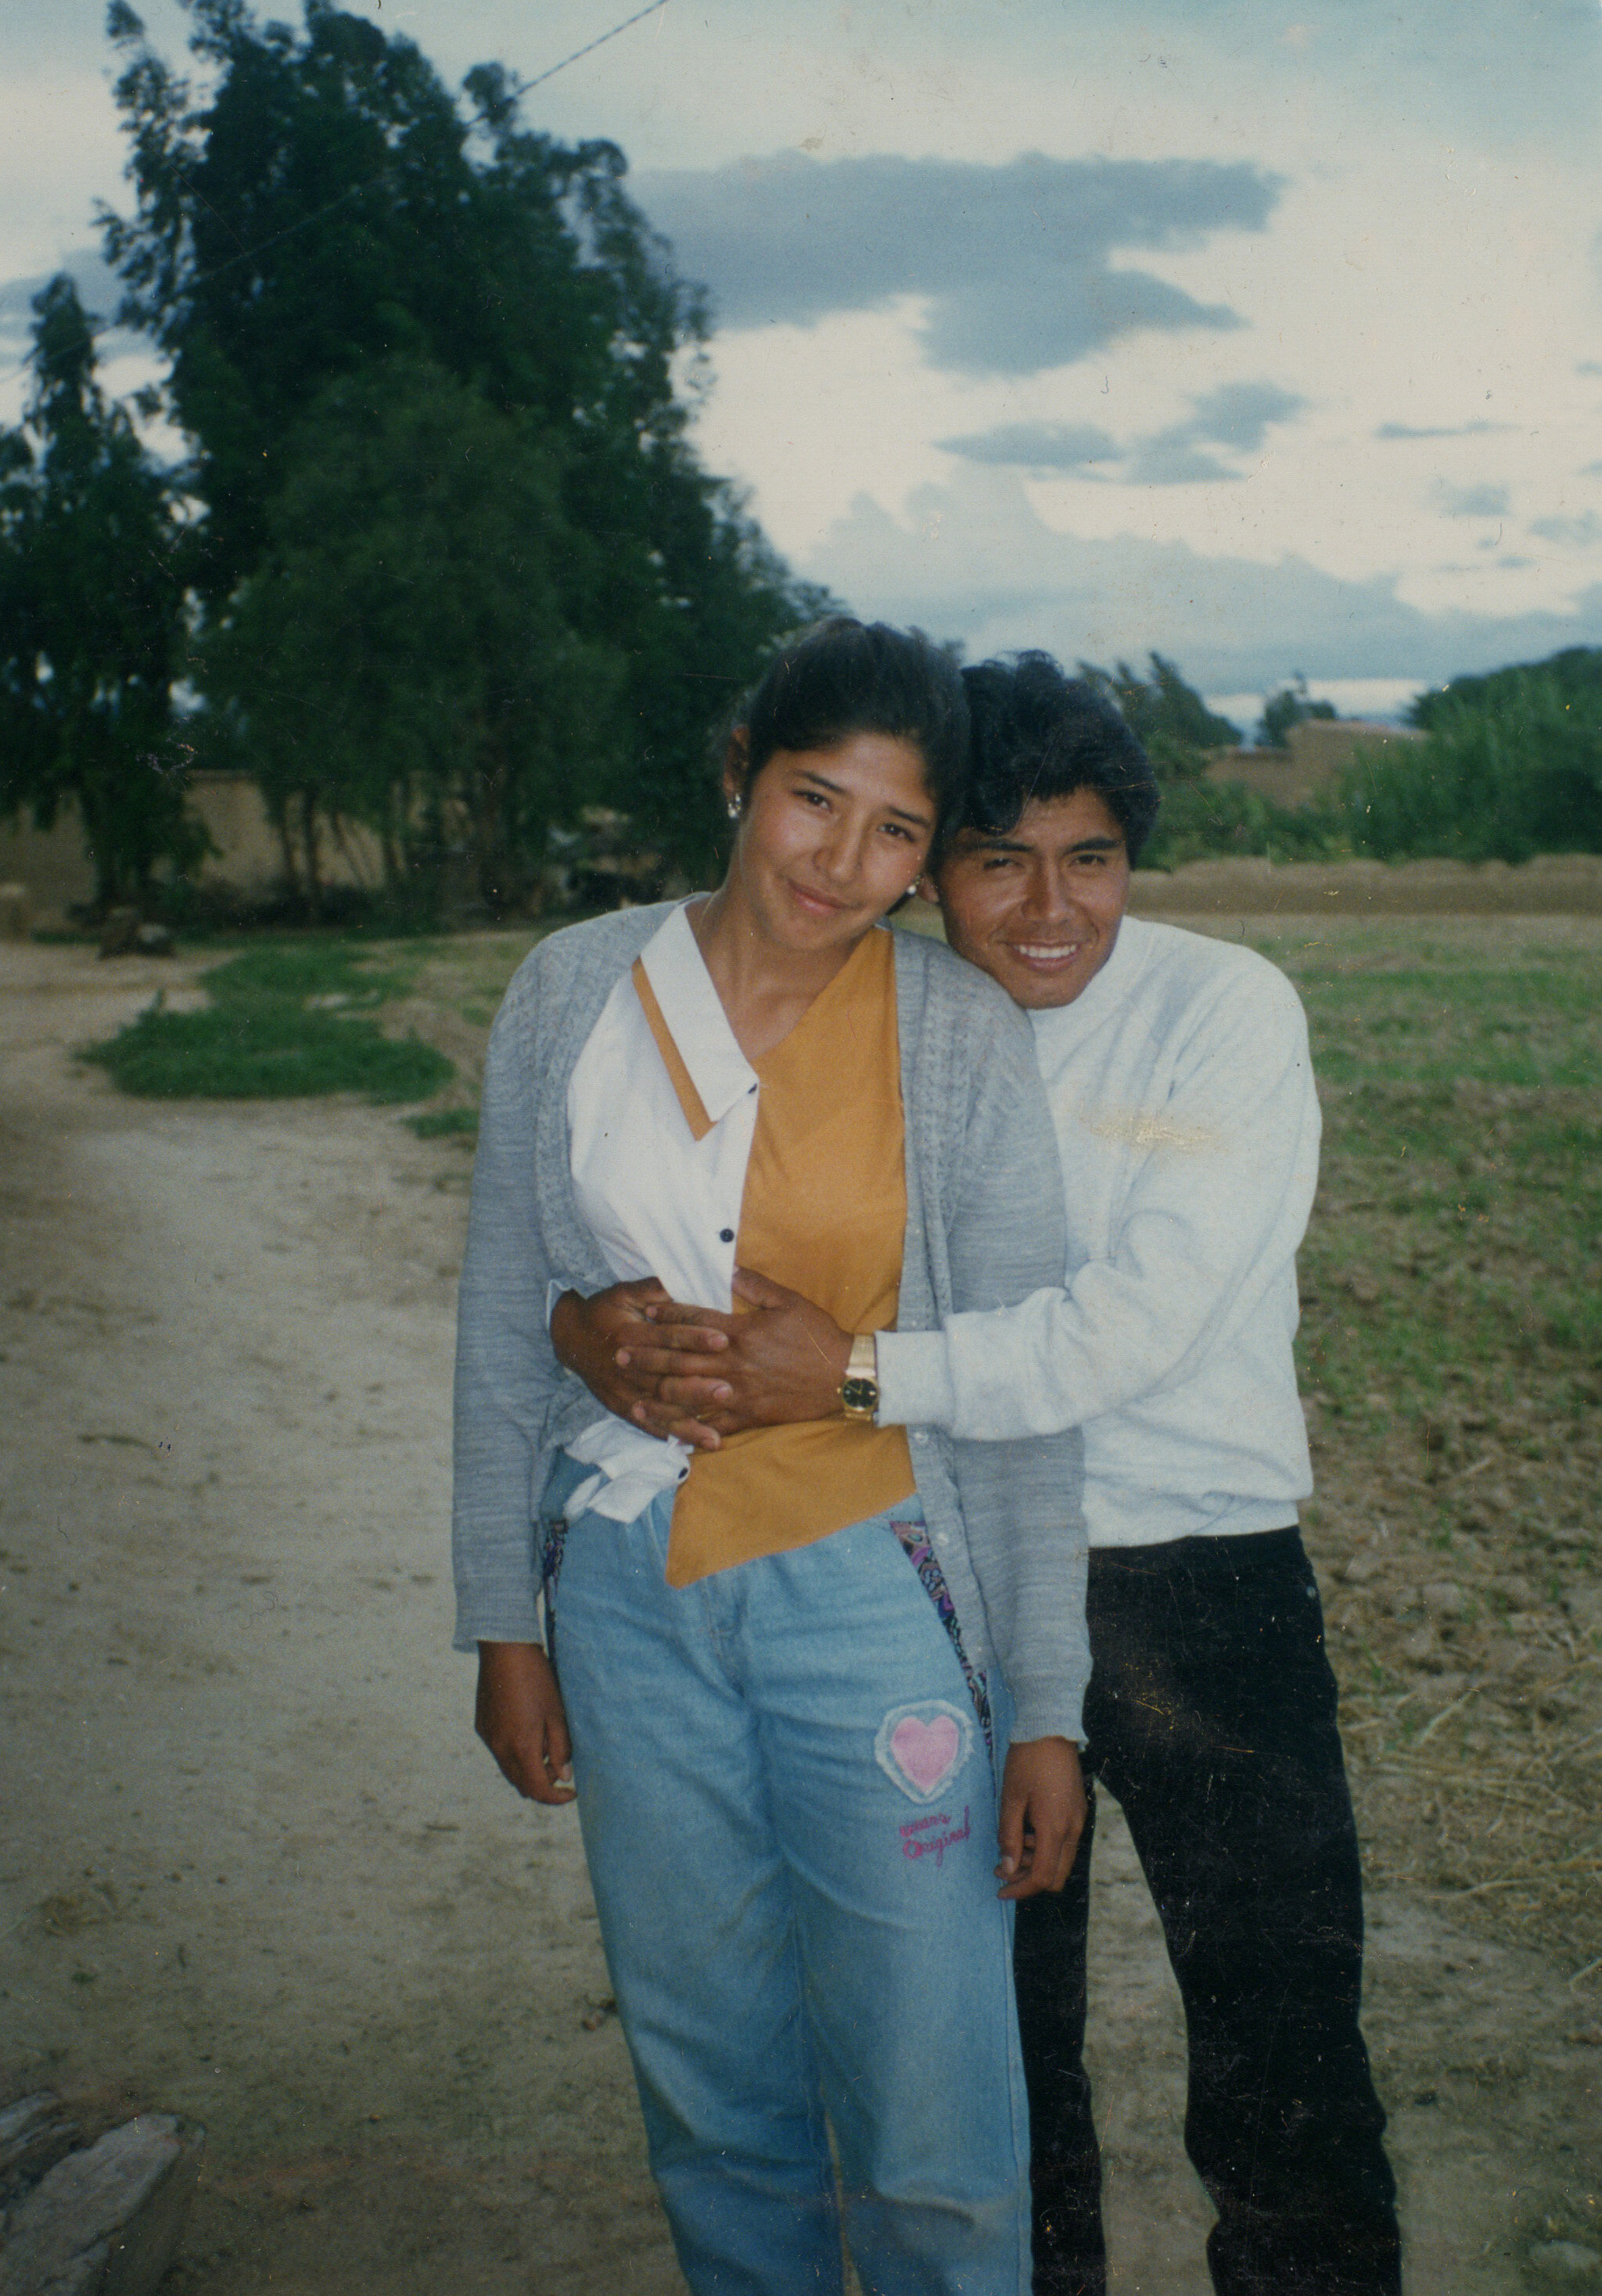  submitted by Jennifer Moya 🇧🇴. “It's a photo of my mom and dad (Olga and Victor, I call them mami y papi) in Tiataco, Bolivia. This is before they were married, they were probably engaged at this point. I really love this photo because it's one of